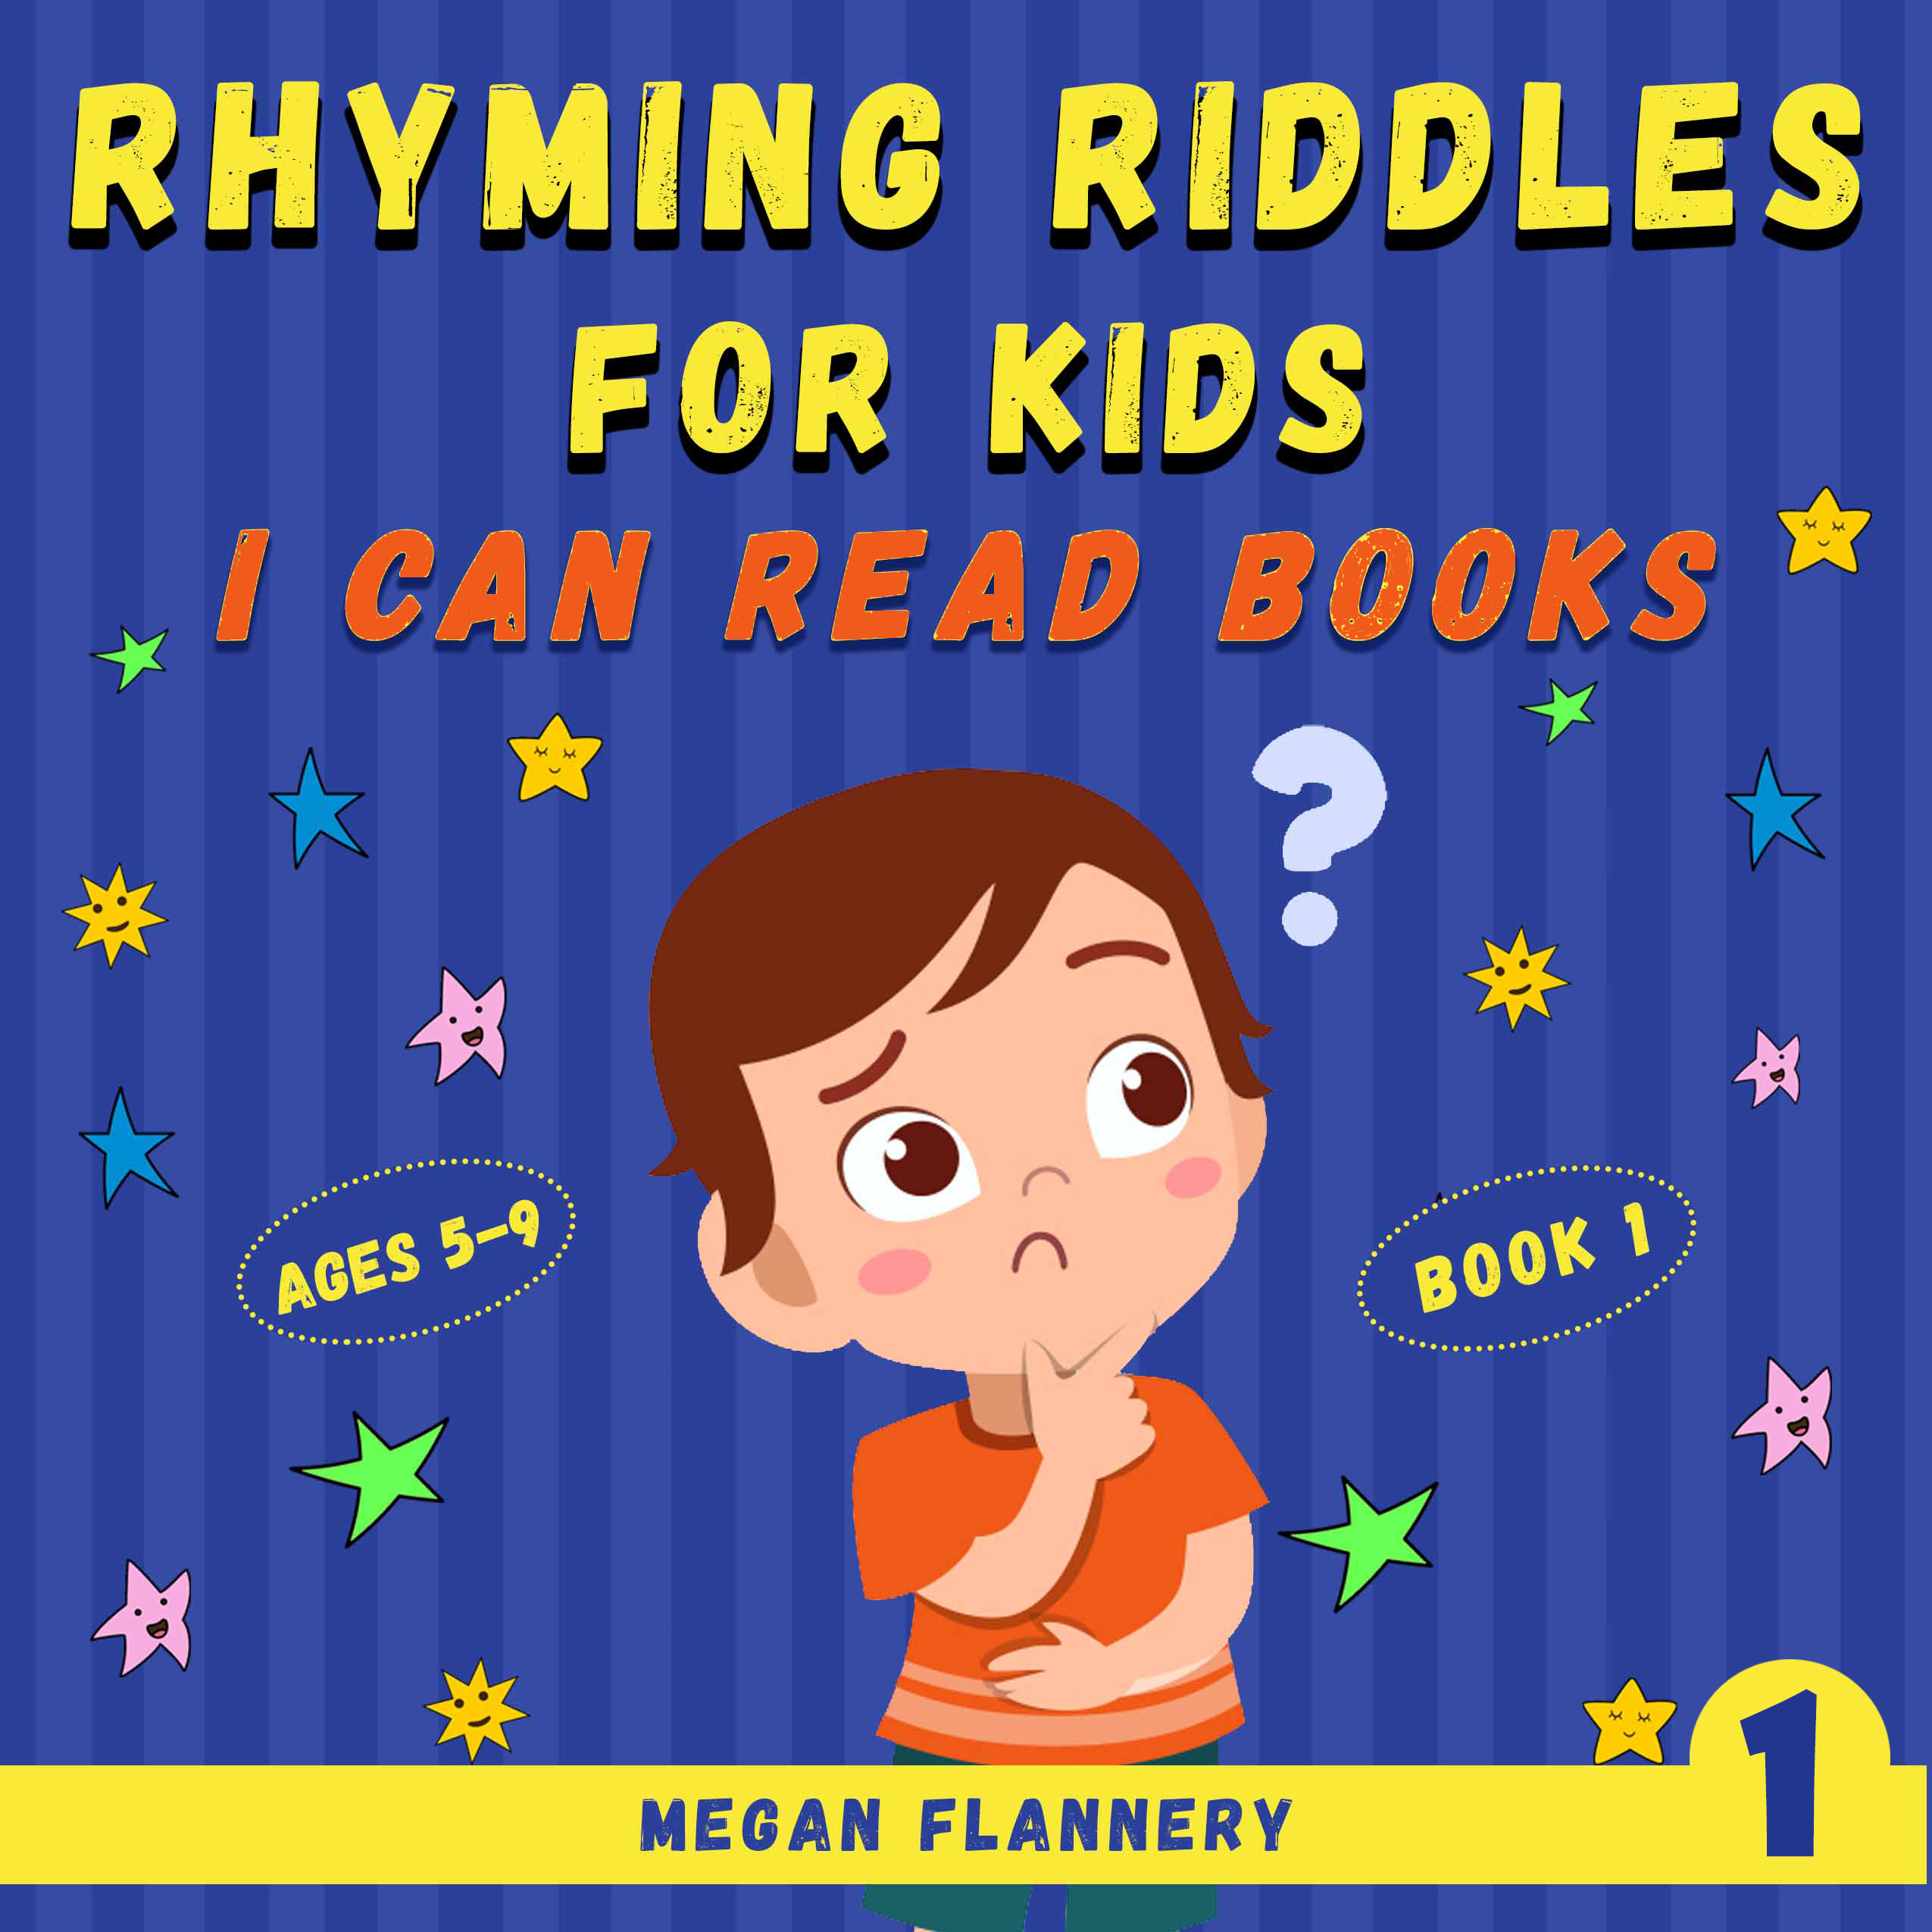 FREE: Rhyming Riddles for Kids Ages 5-9. I Can Read Books by Megan Flannery